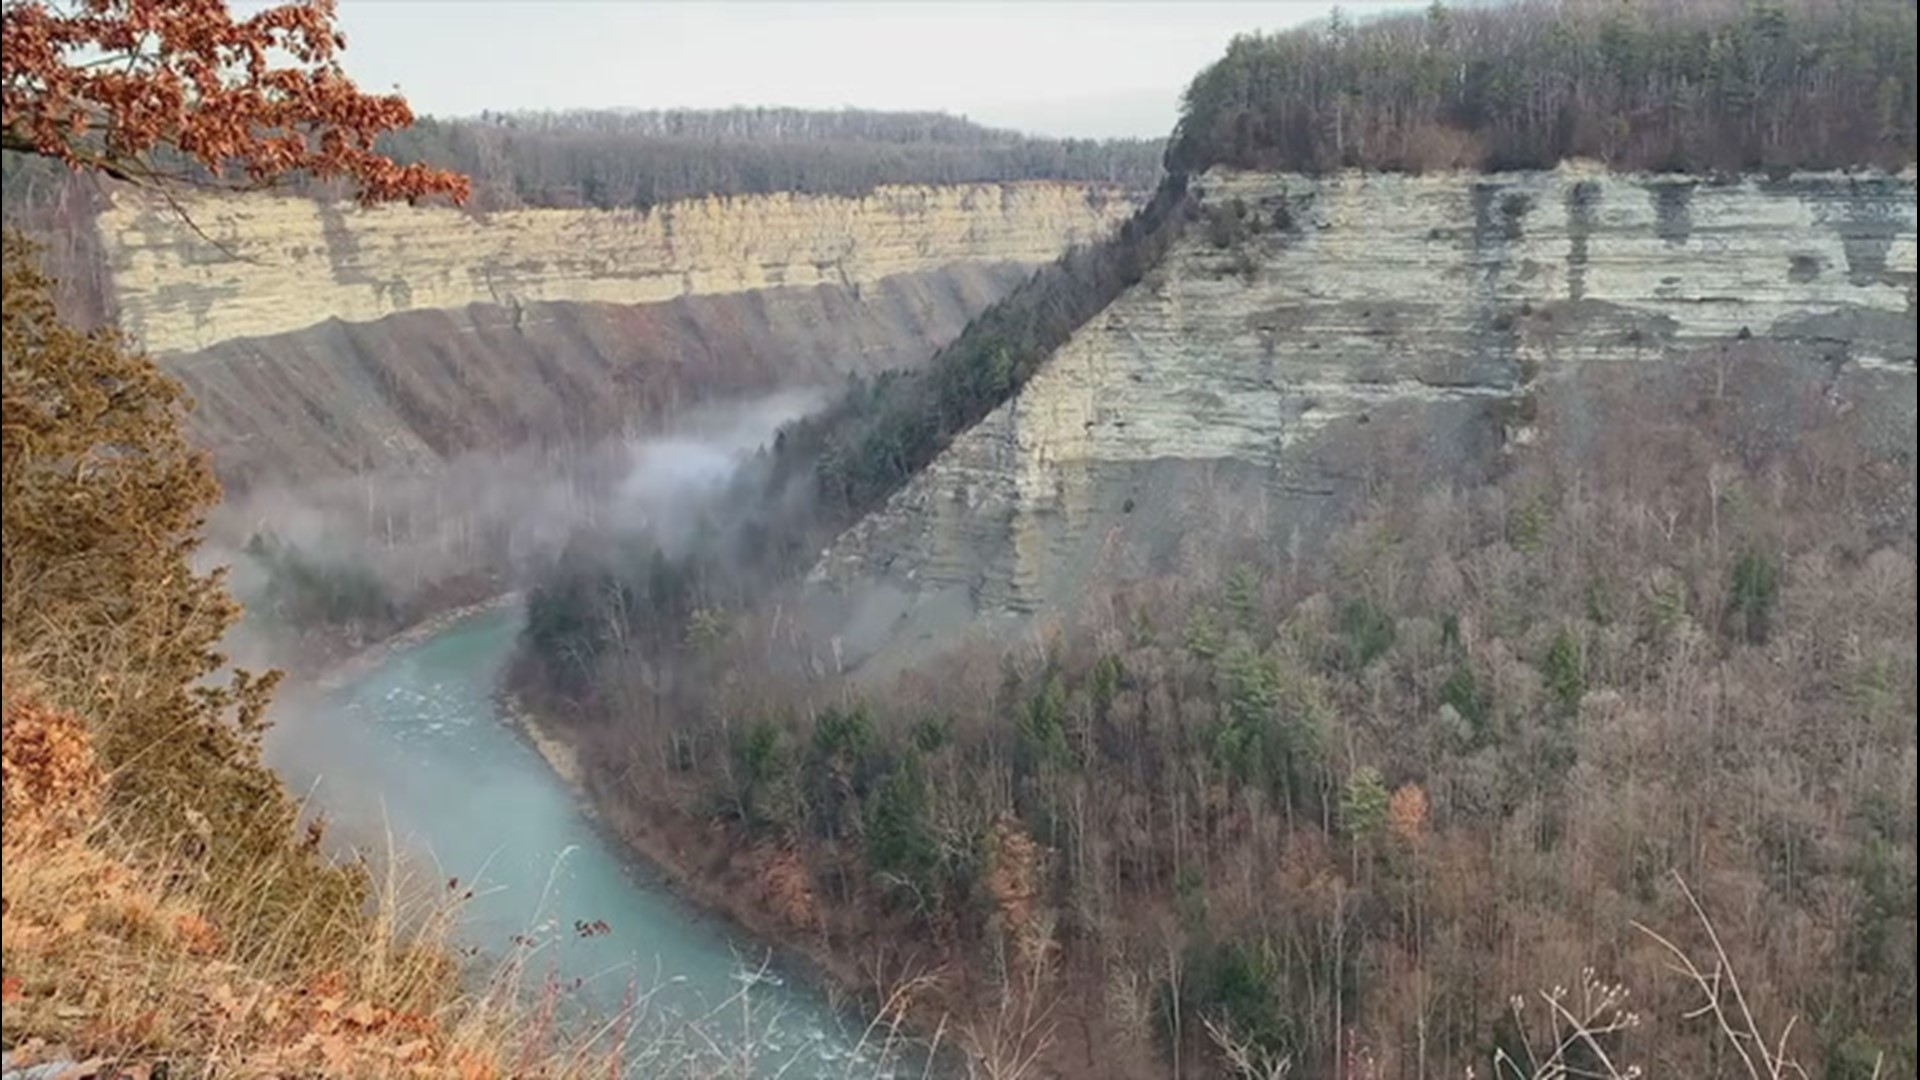 As water vapor warmed by the sun condensed into visible droplets on the morning of Jan. 16, 'clouds' of mist drifted just above the Genesee River in Letchworth State Park.